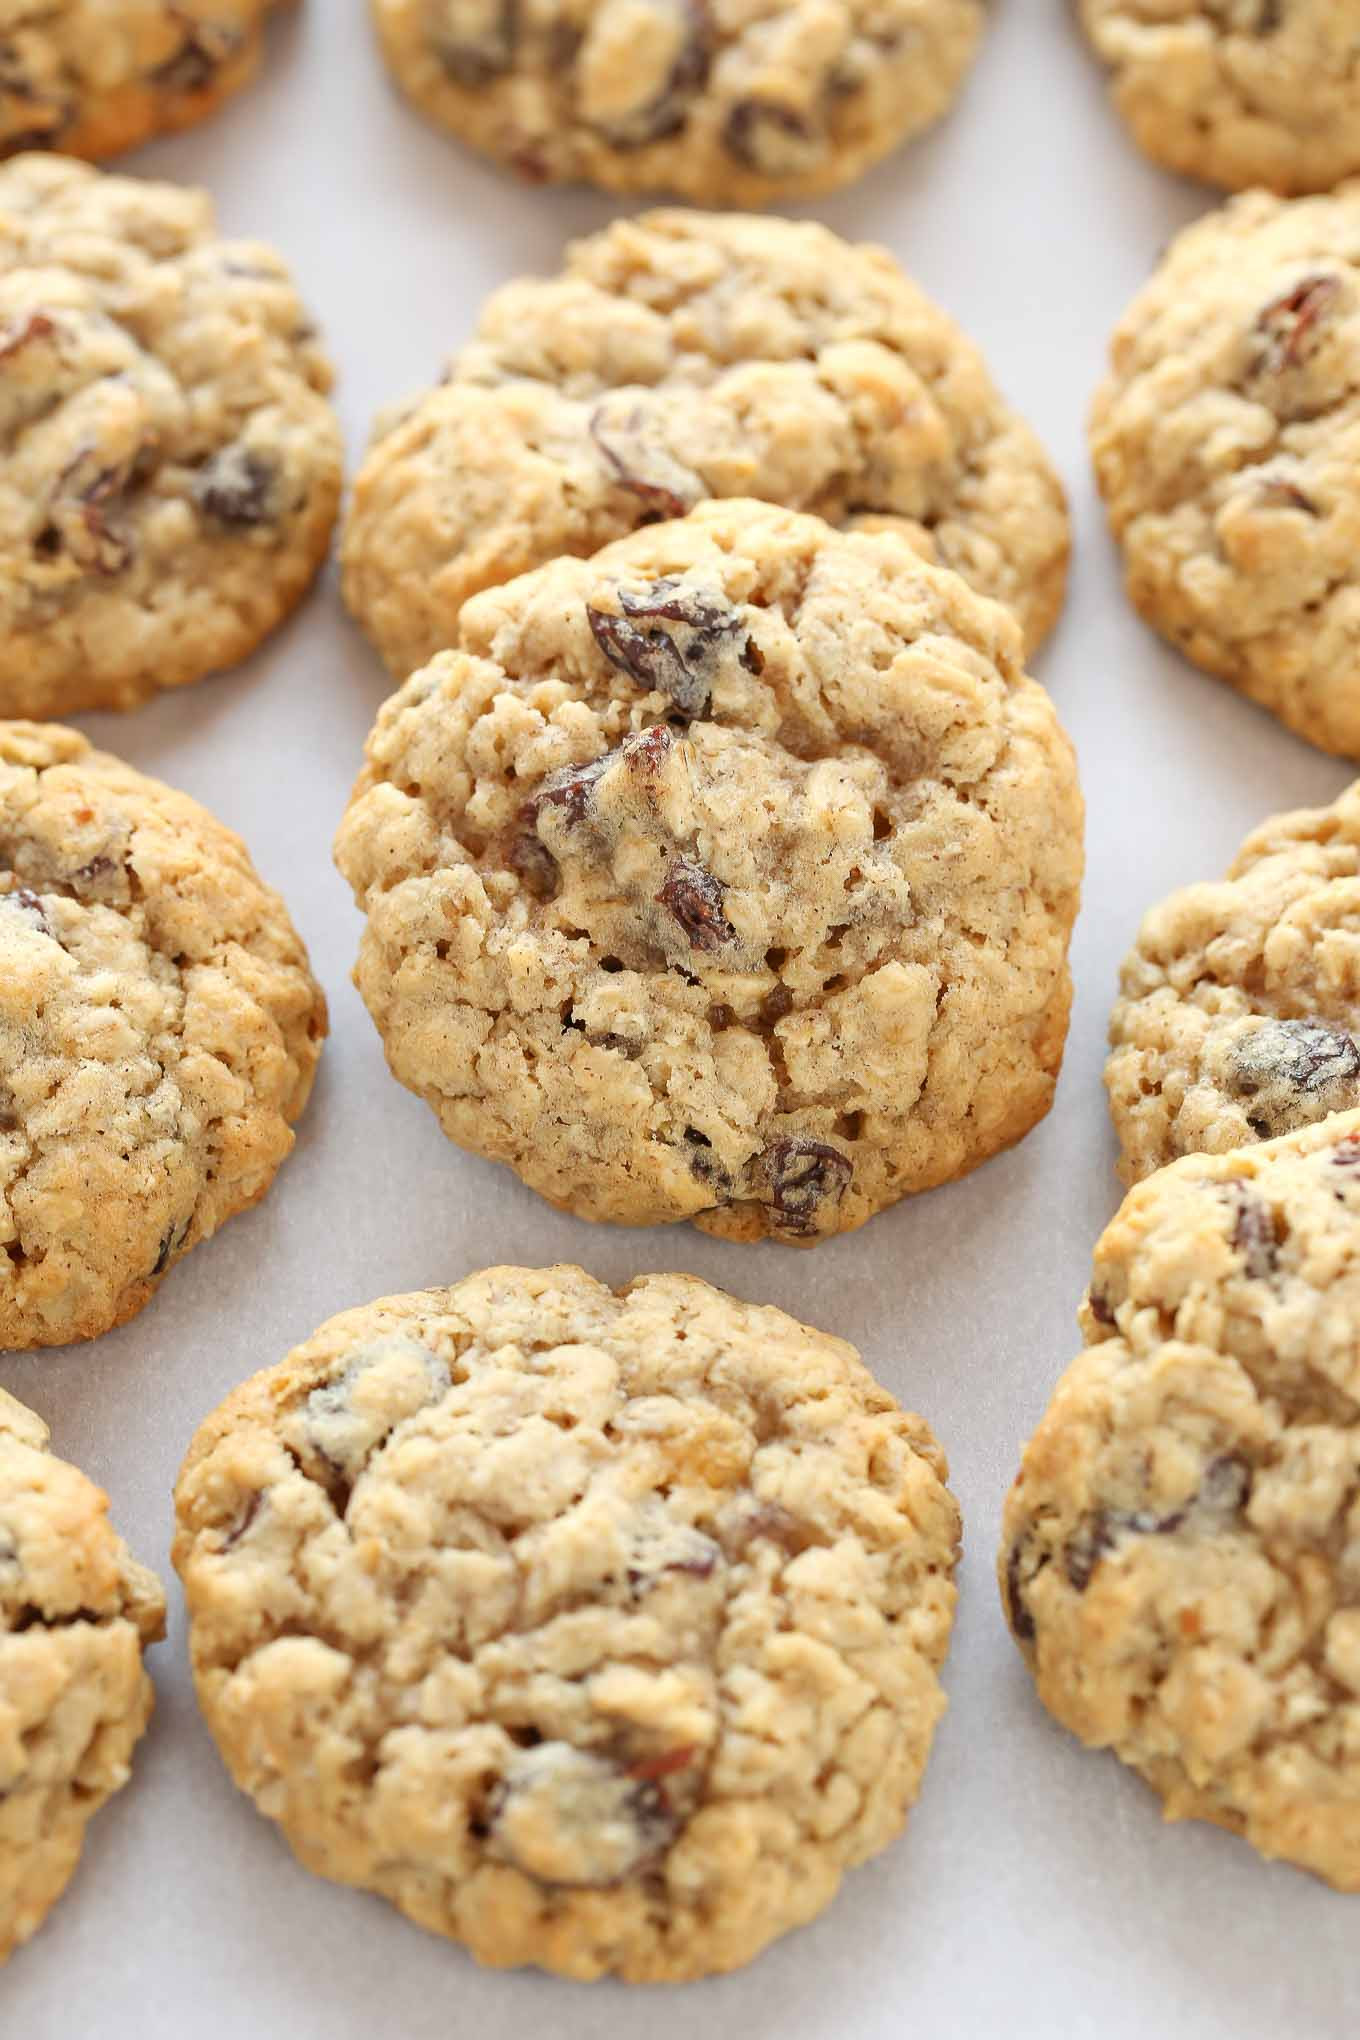 Oatmeal Raisin Cookies soft Luxury soft and Chewy Oatmeal Raisin Cookies